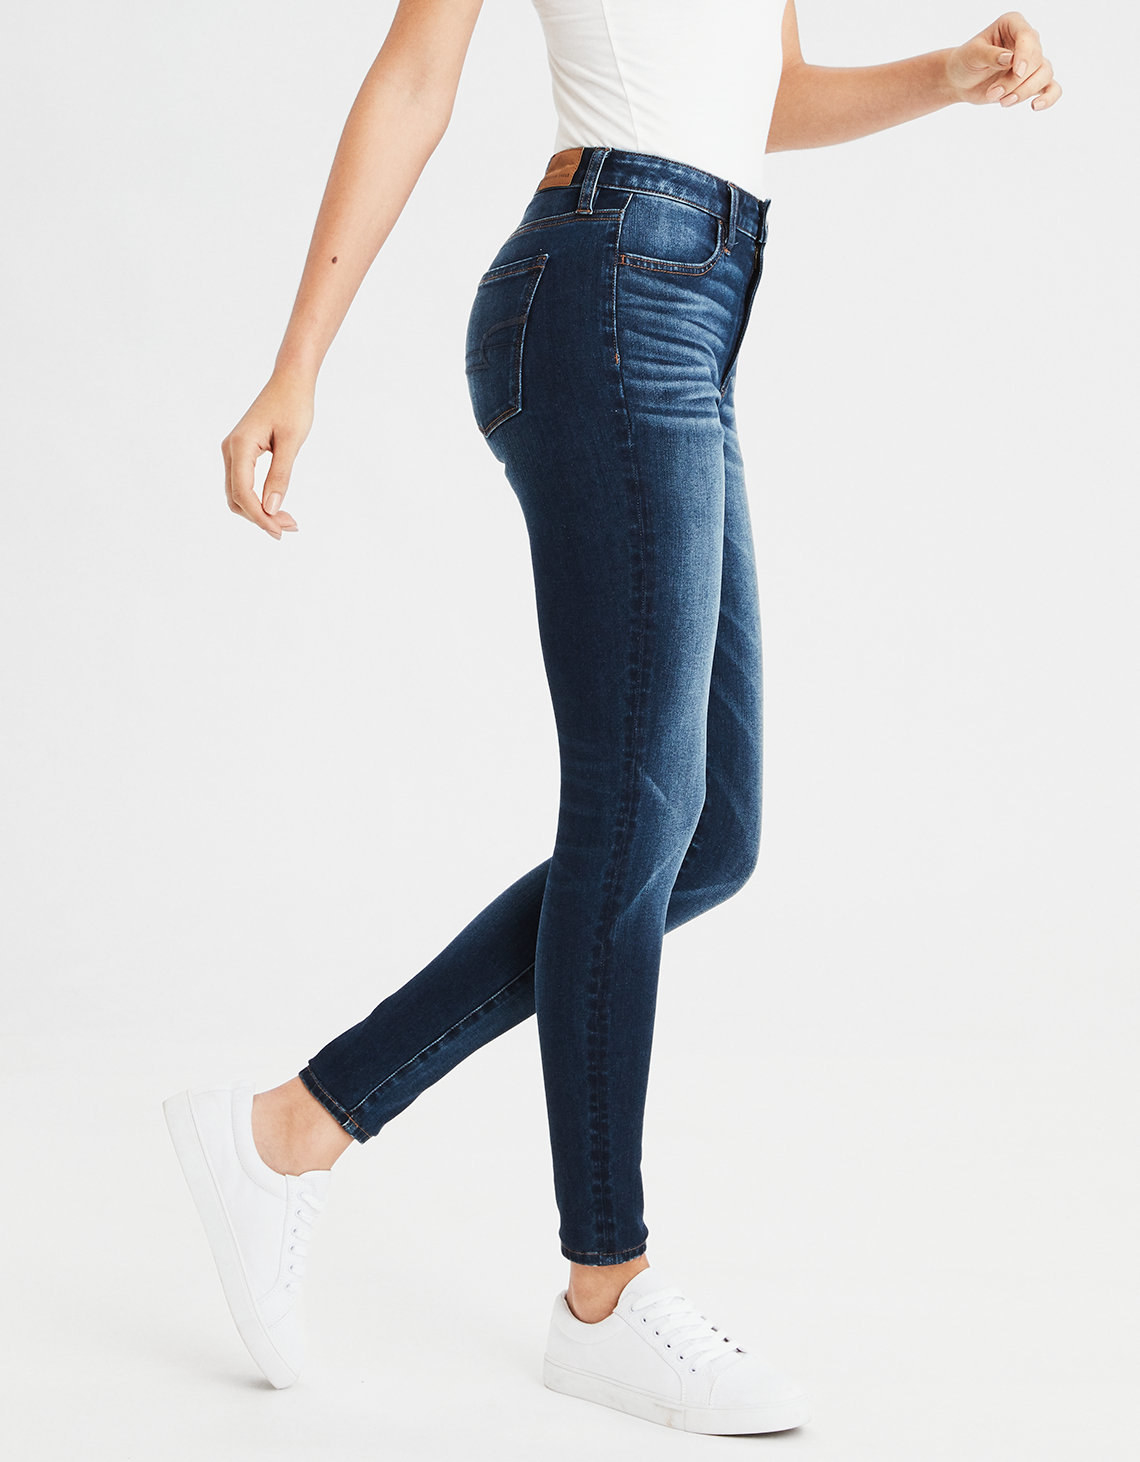 american eagle jeans women's high rise